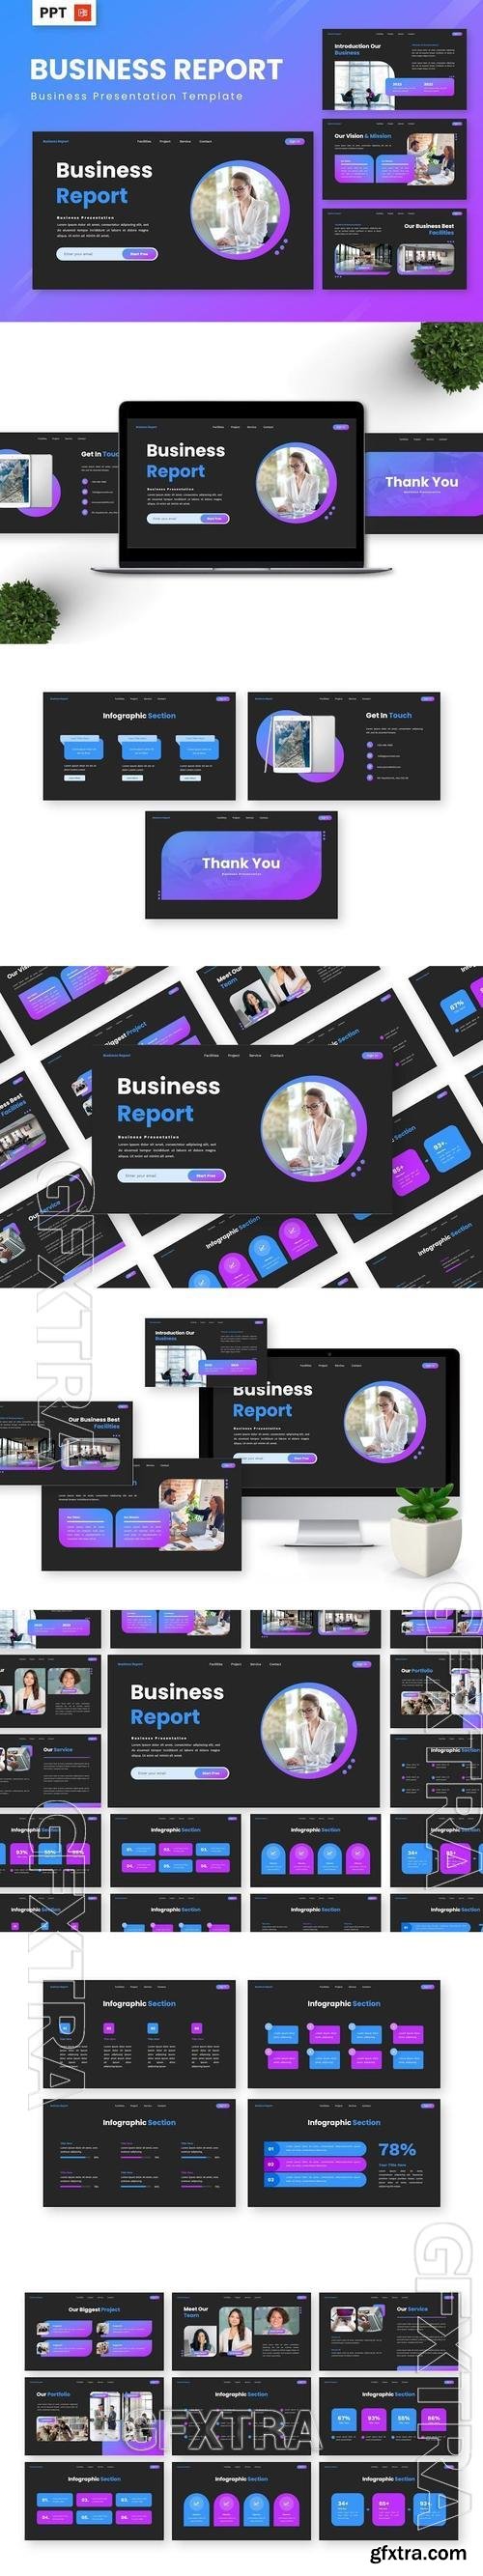 Business Report - Business Powerpoint Templates W6QWSH5